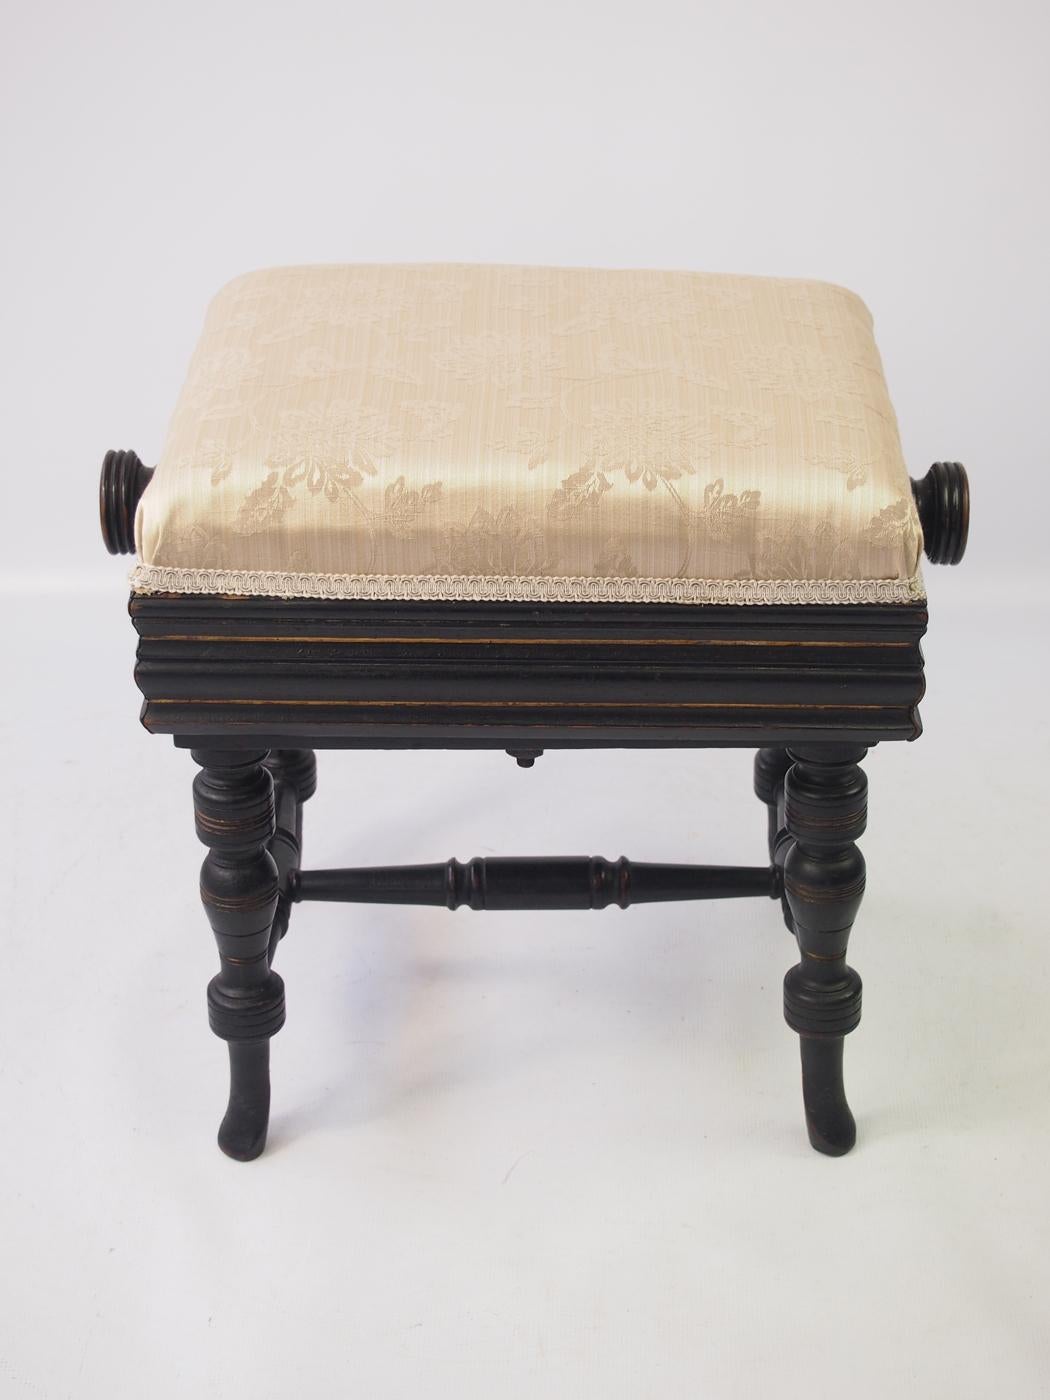 Late 19th Century Antique English Victorian Aesthetic Rise and Fall Piano Stool Music Seat Bench For Sale